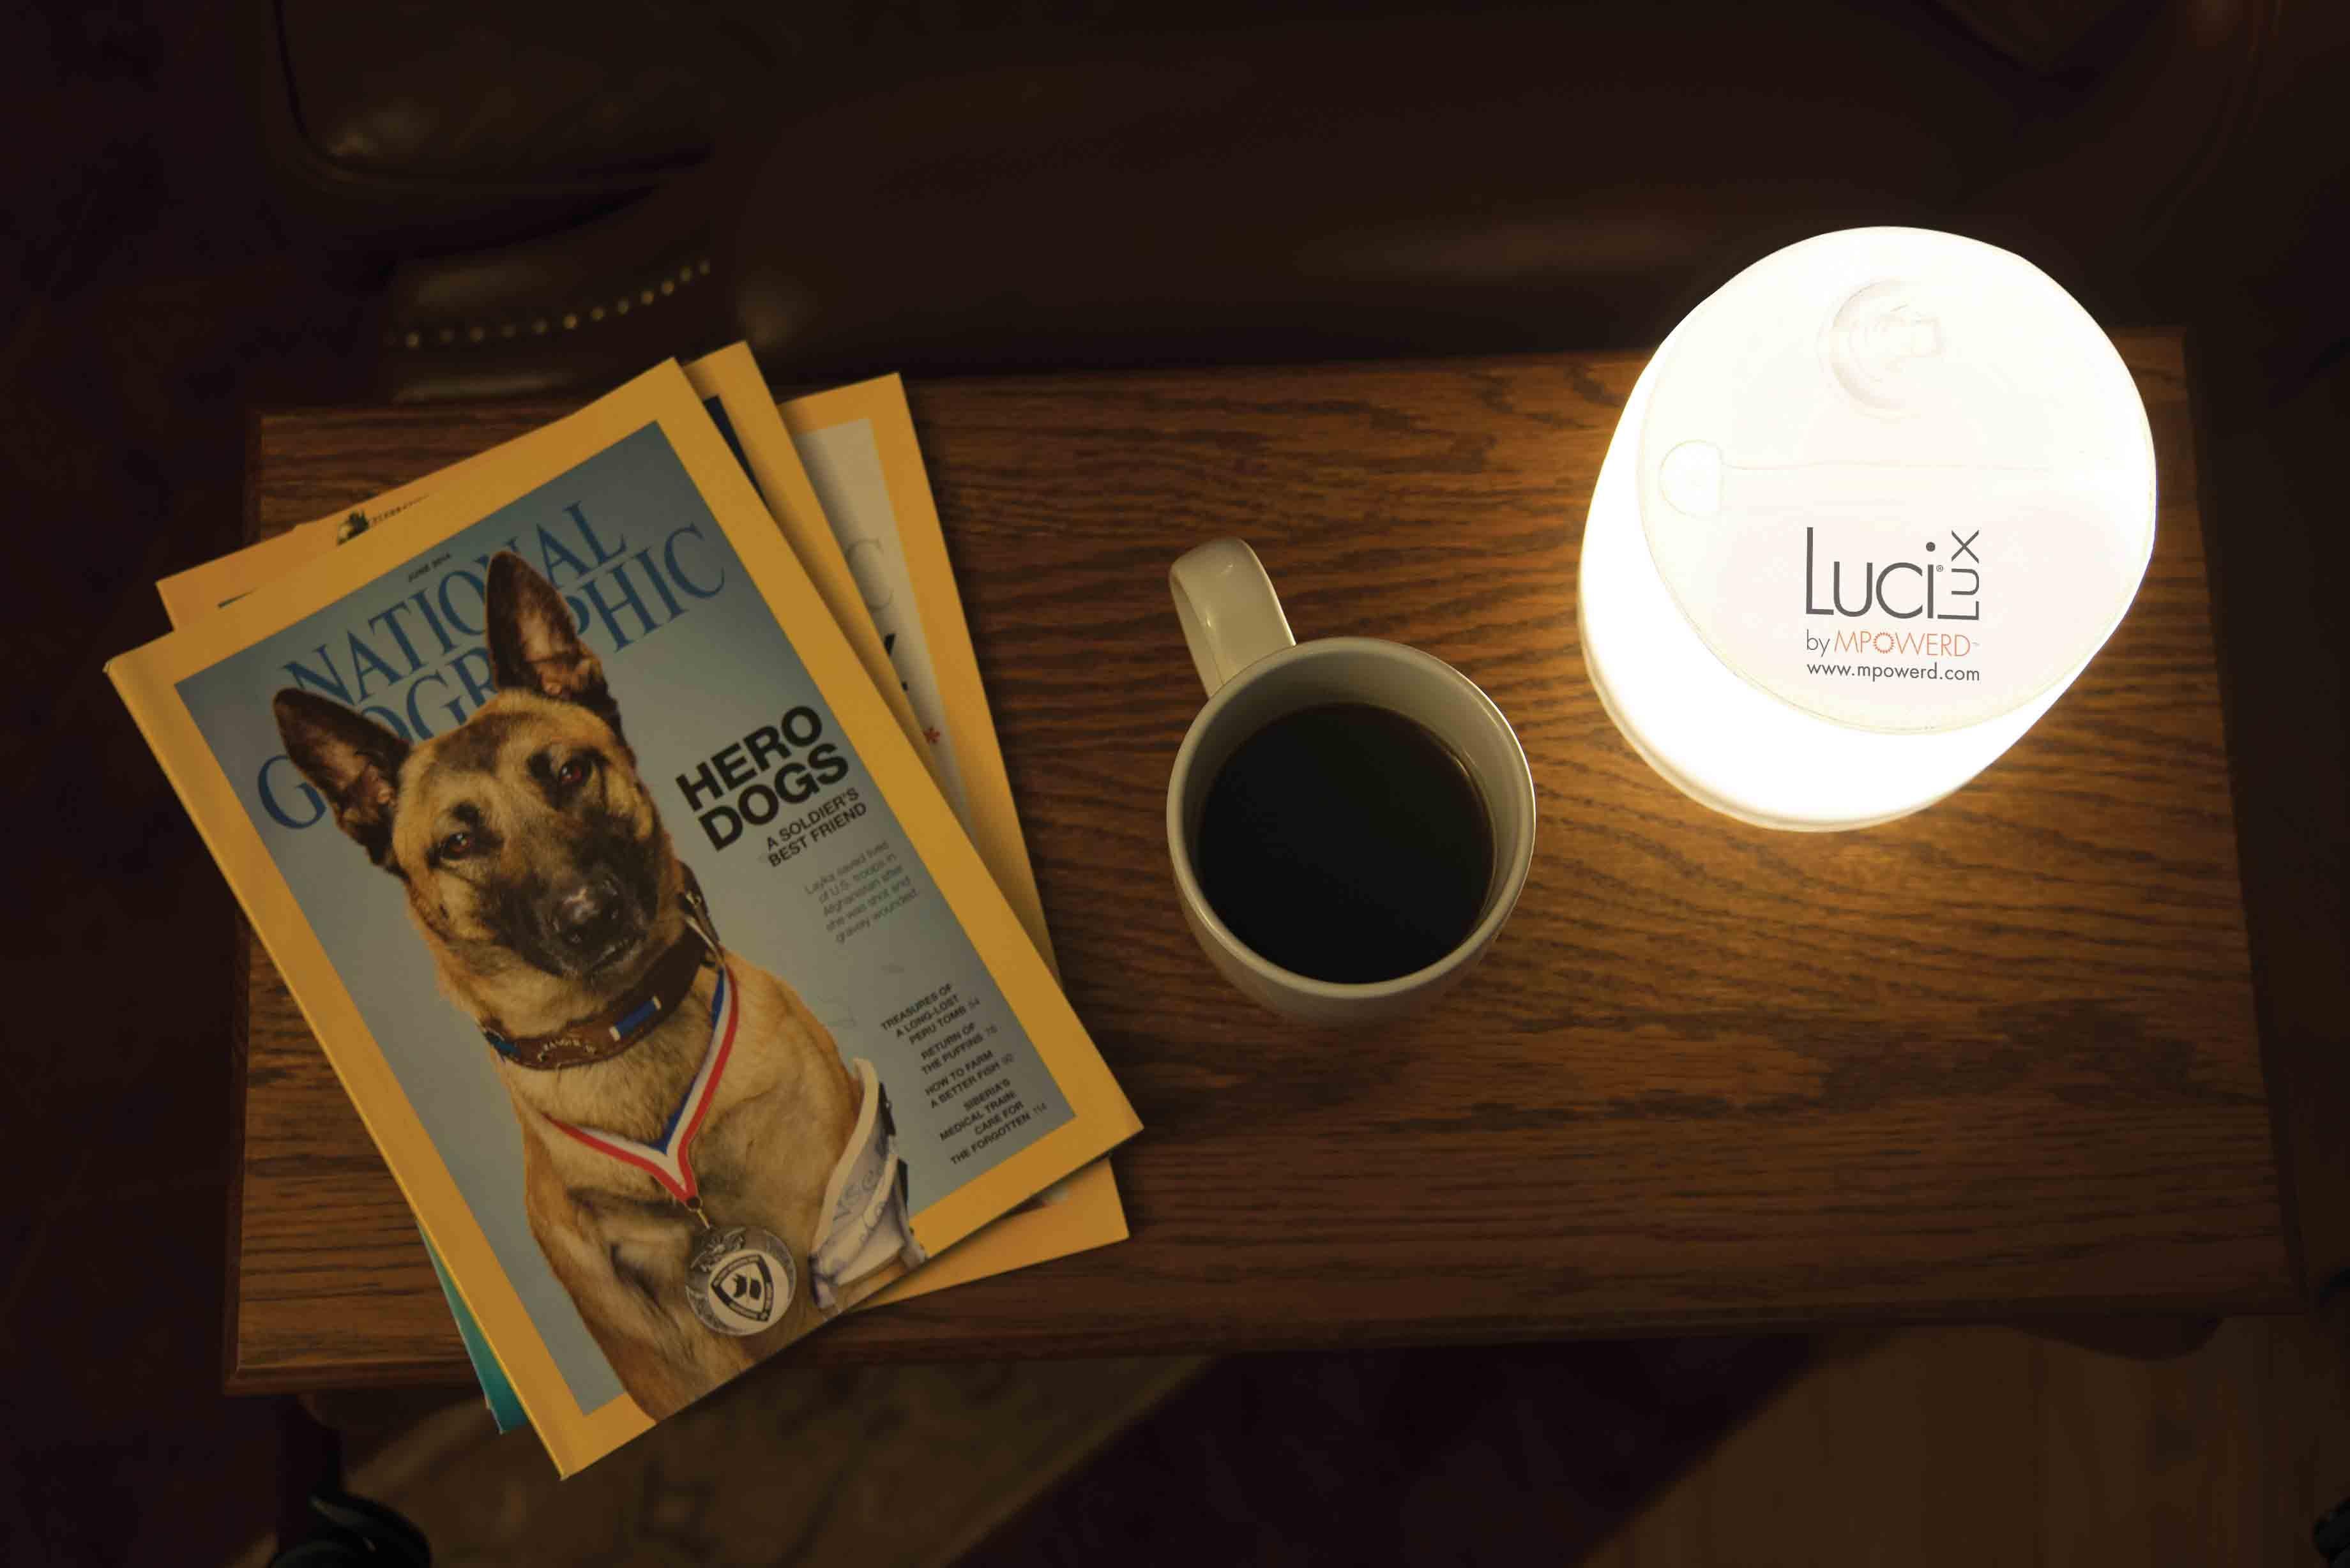 Luci Lux Solar Lantern With Frosted Finish